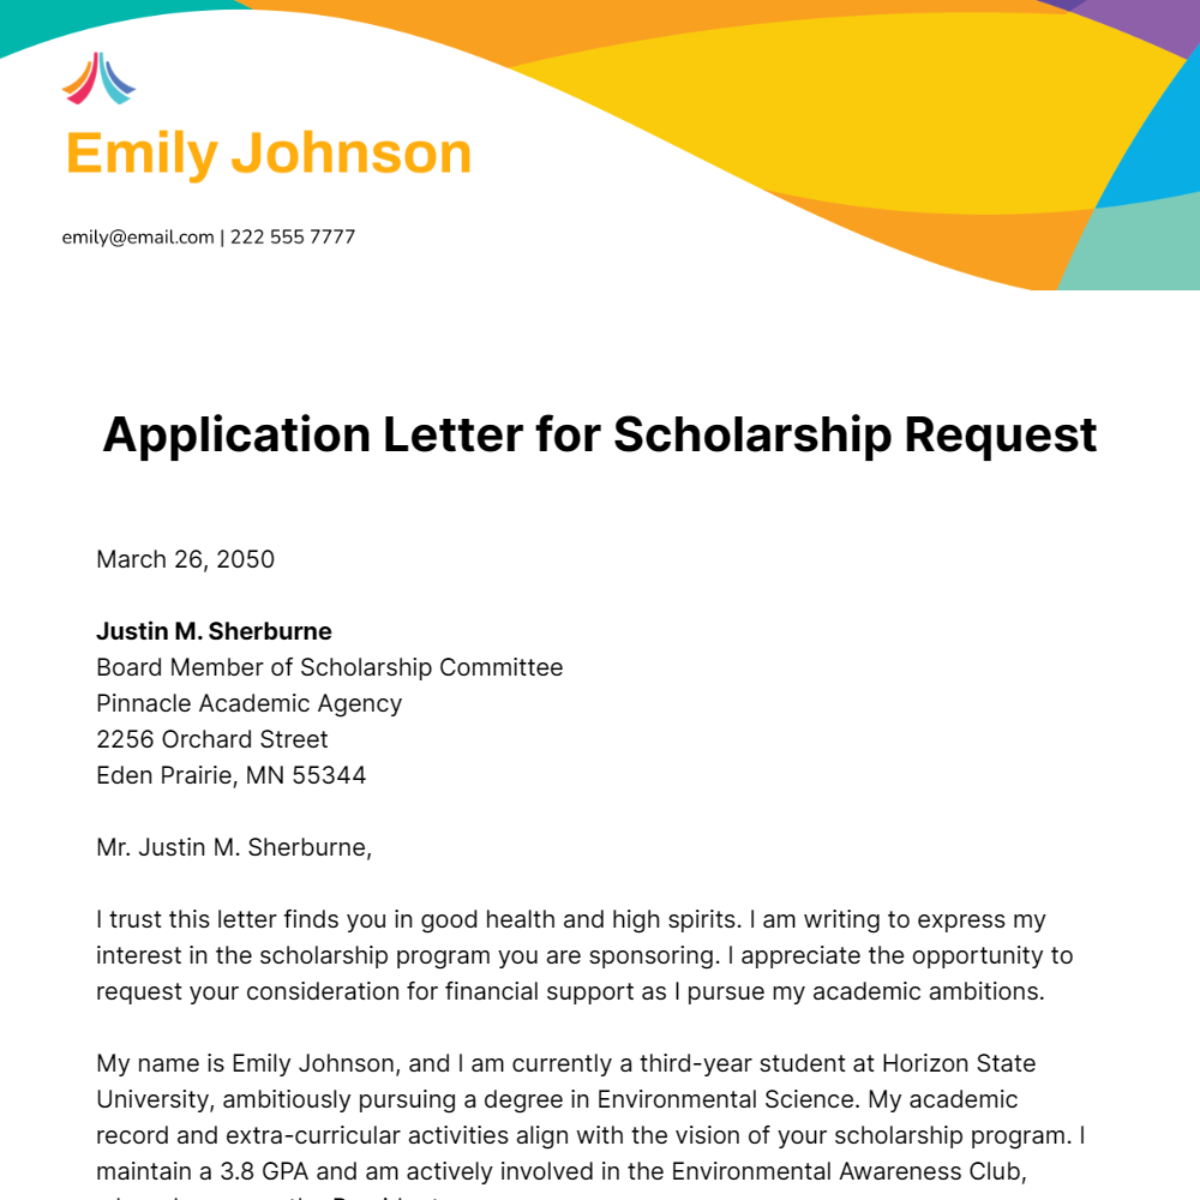 Application Letter for Scholarship Request Template